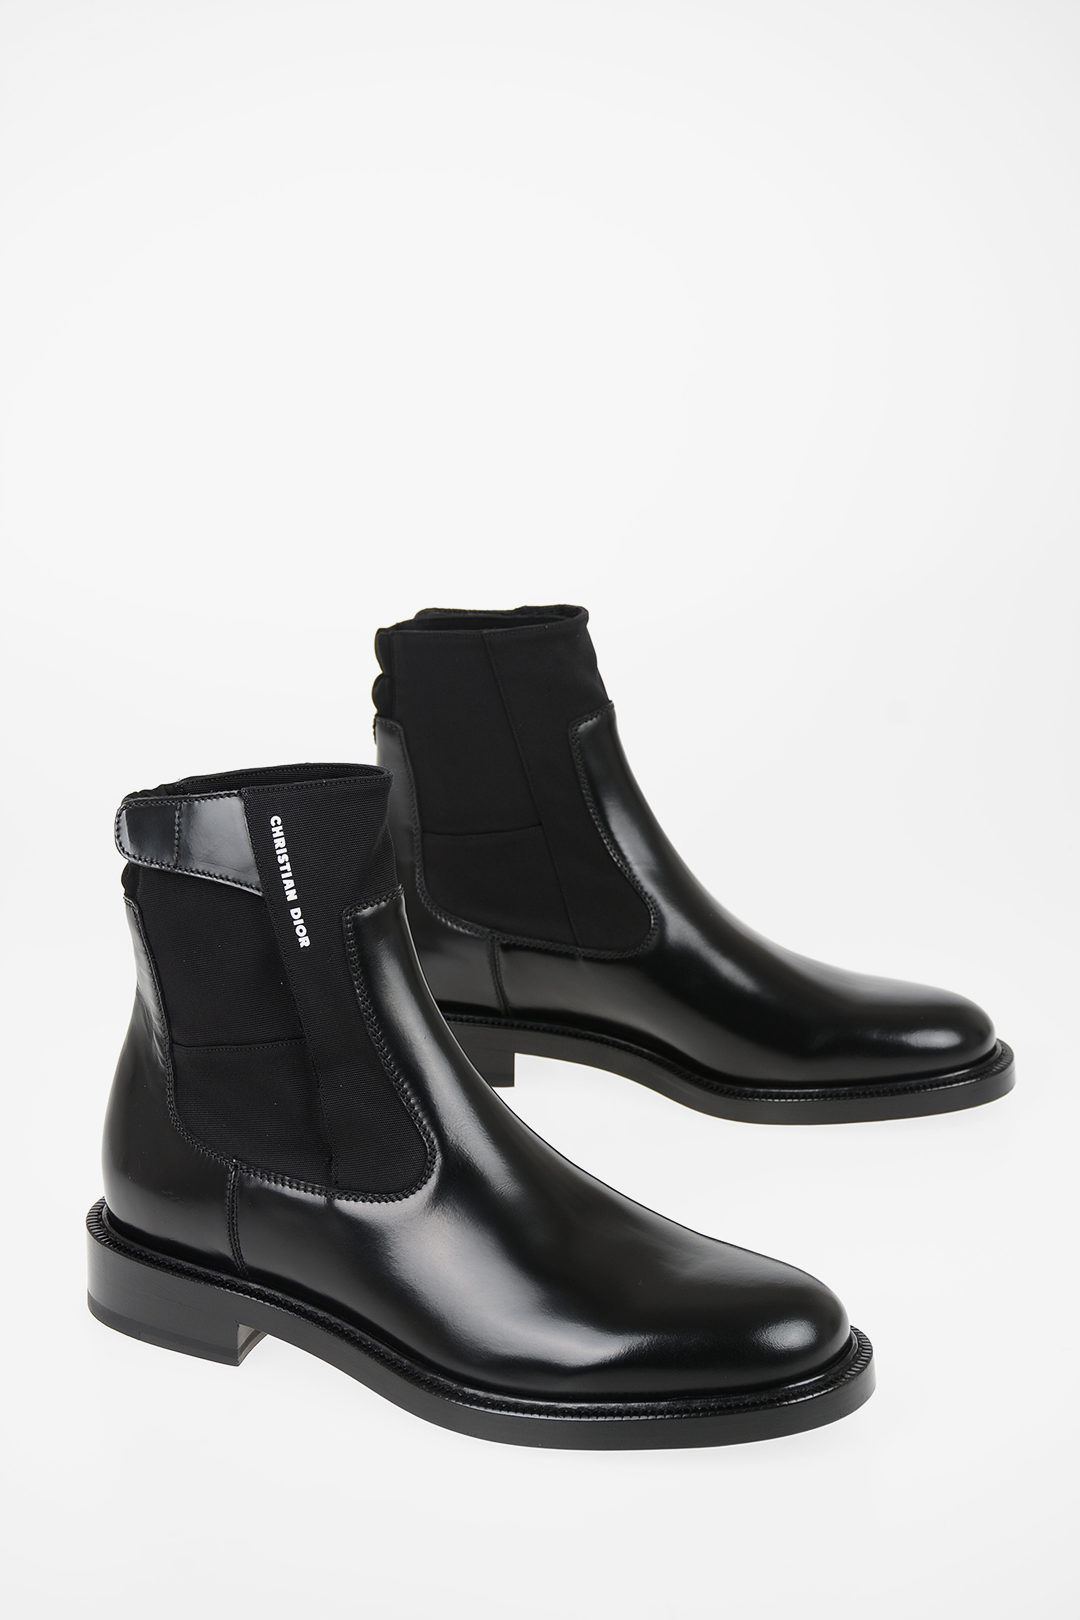 Dior leather Chelsea boots men - Glamood Outlet